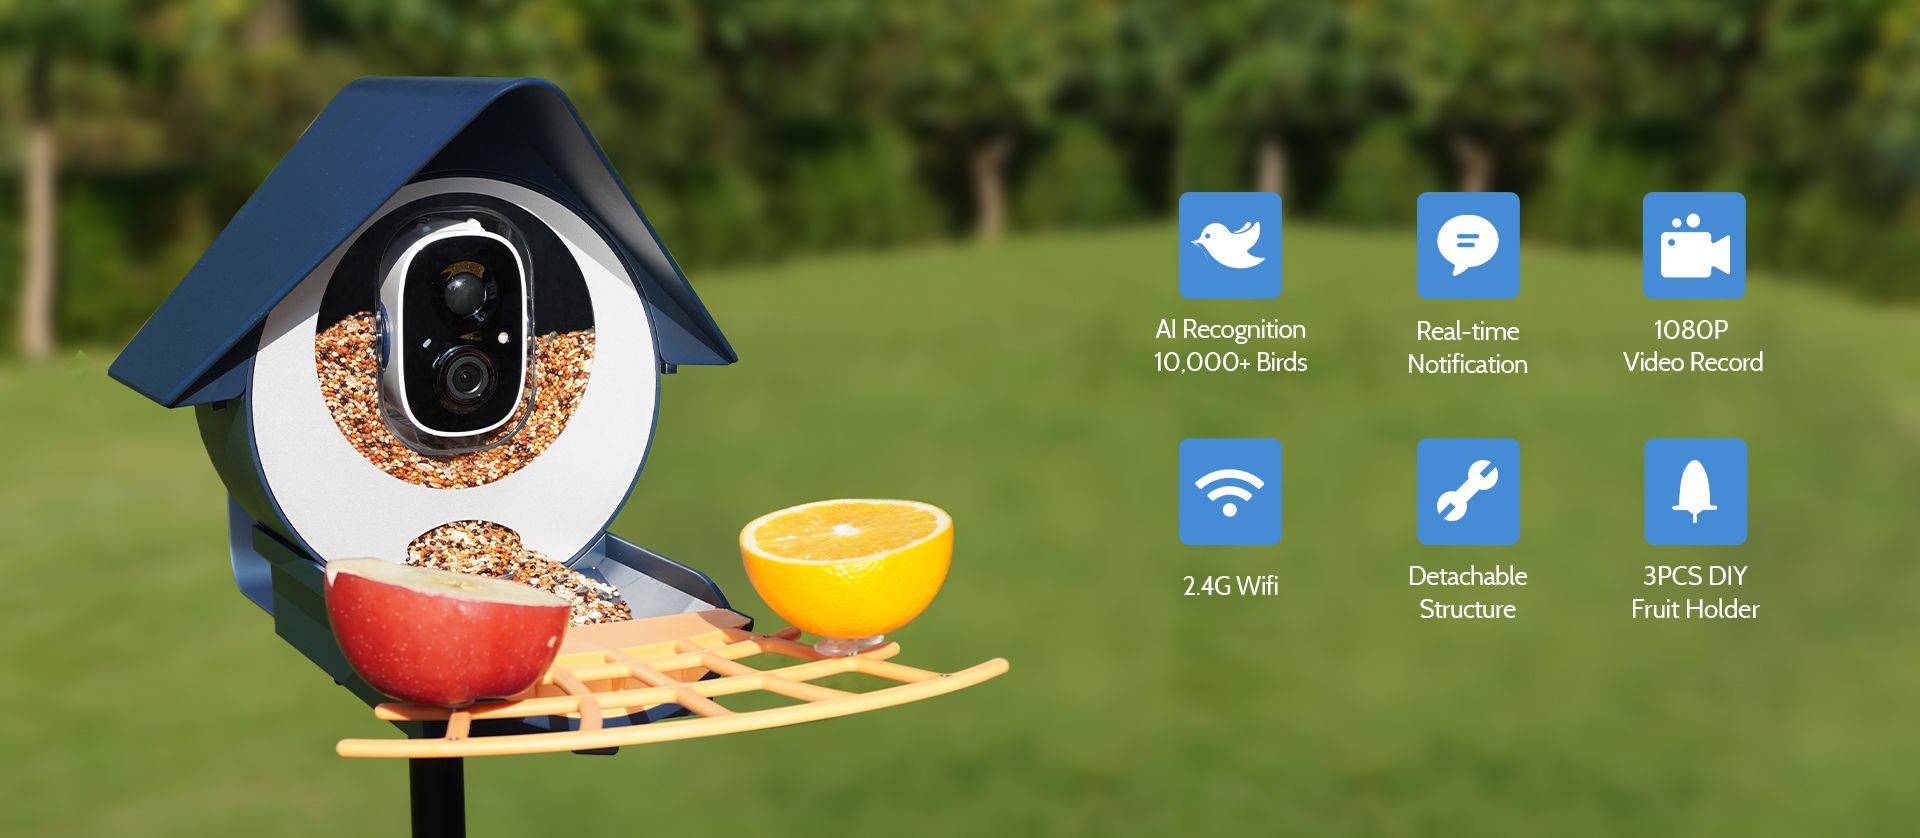 Birdkiss smart bird feeder with bird seed, apples and oranges and key features of this